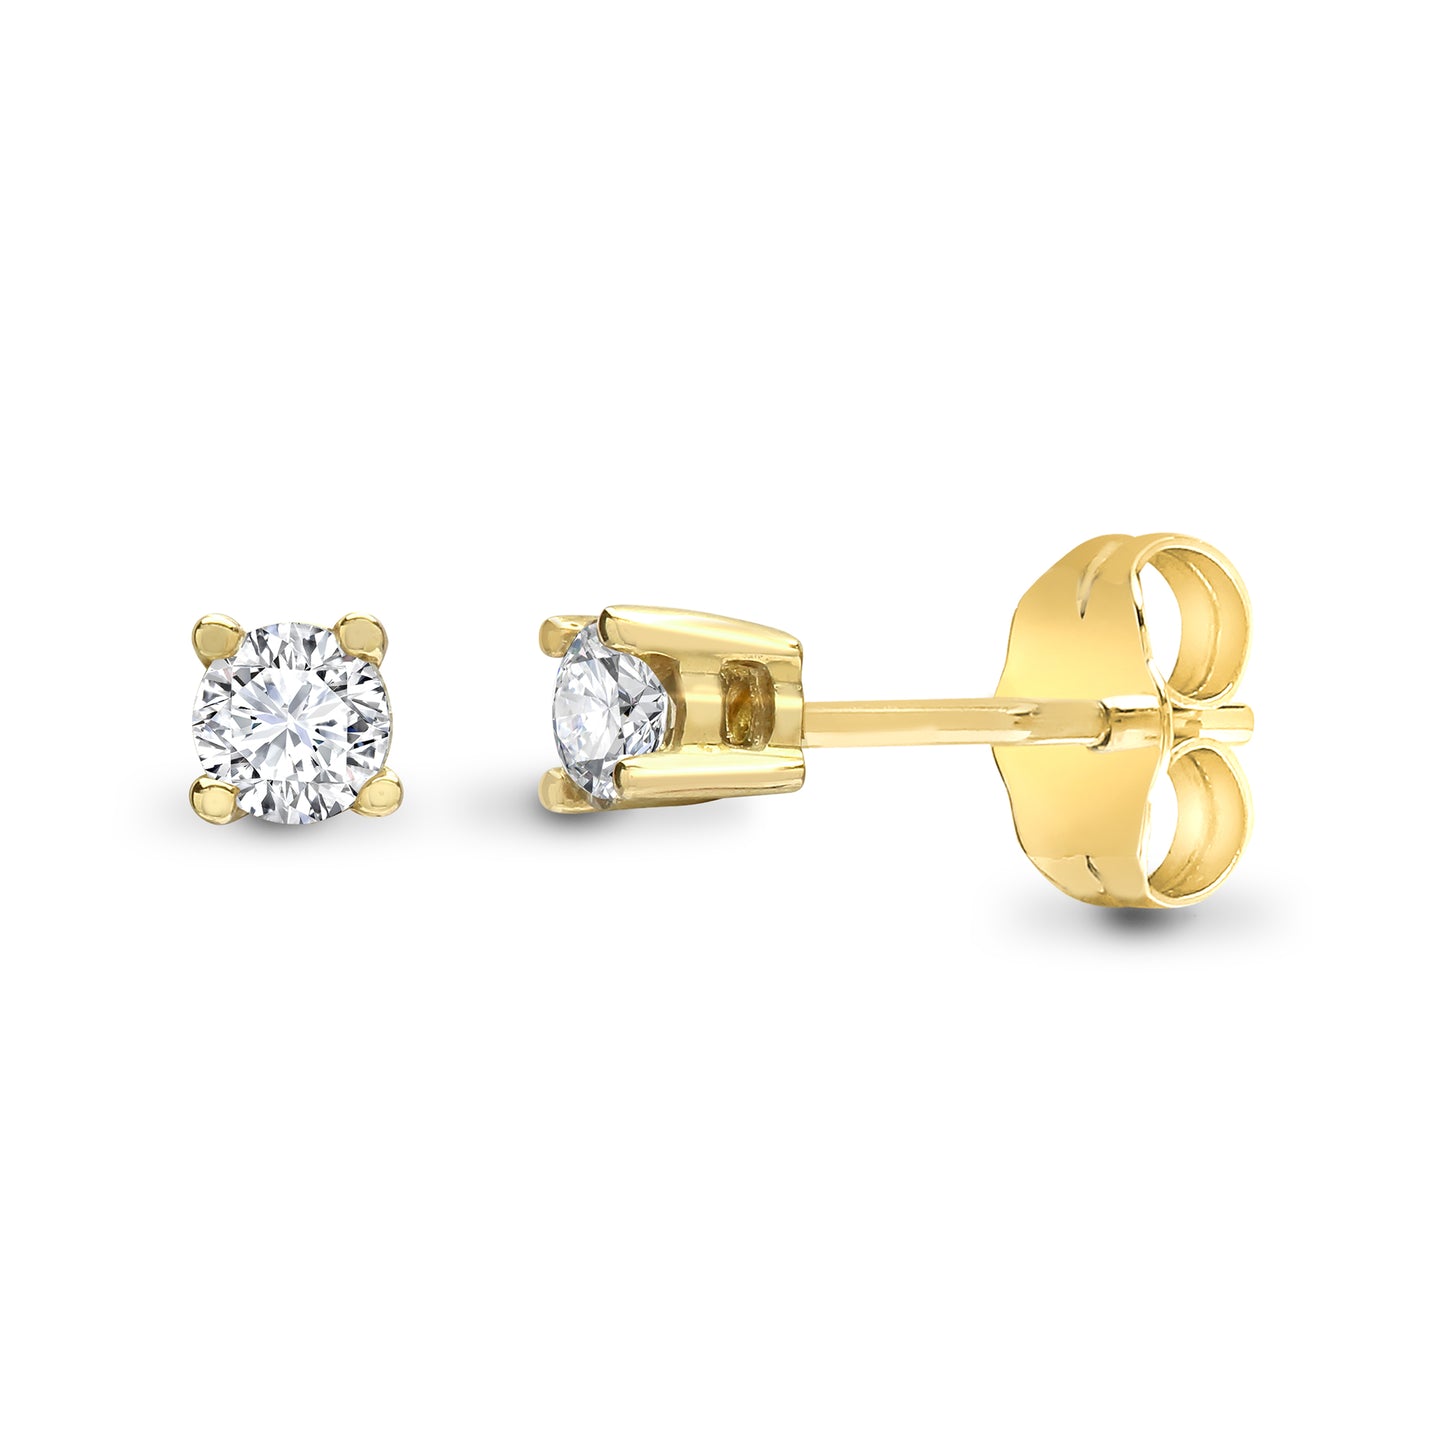 9ct Gold  0.2ct Diamond Solitaire Stud Earrings - 9E092-020